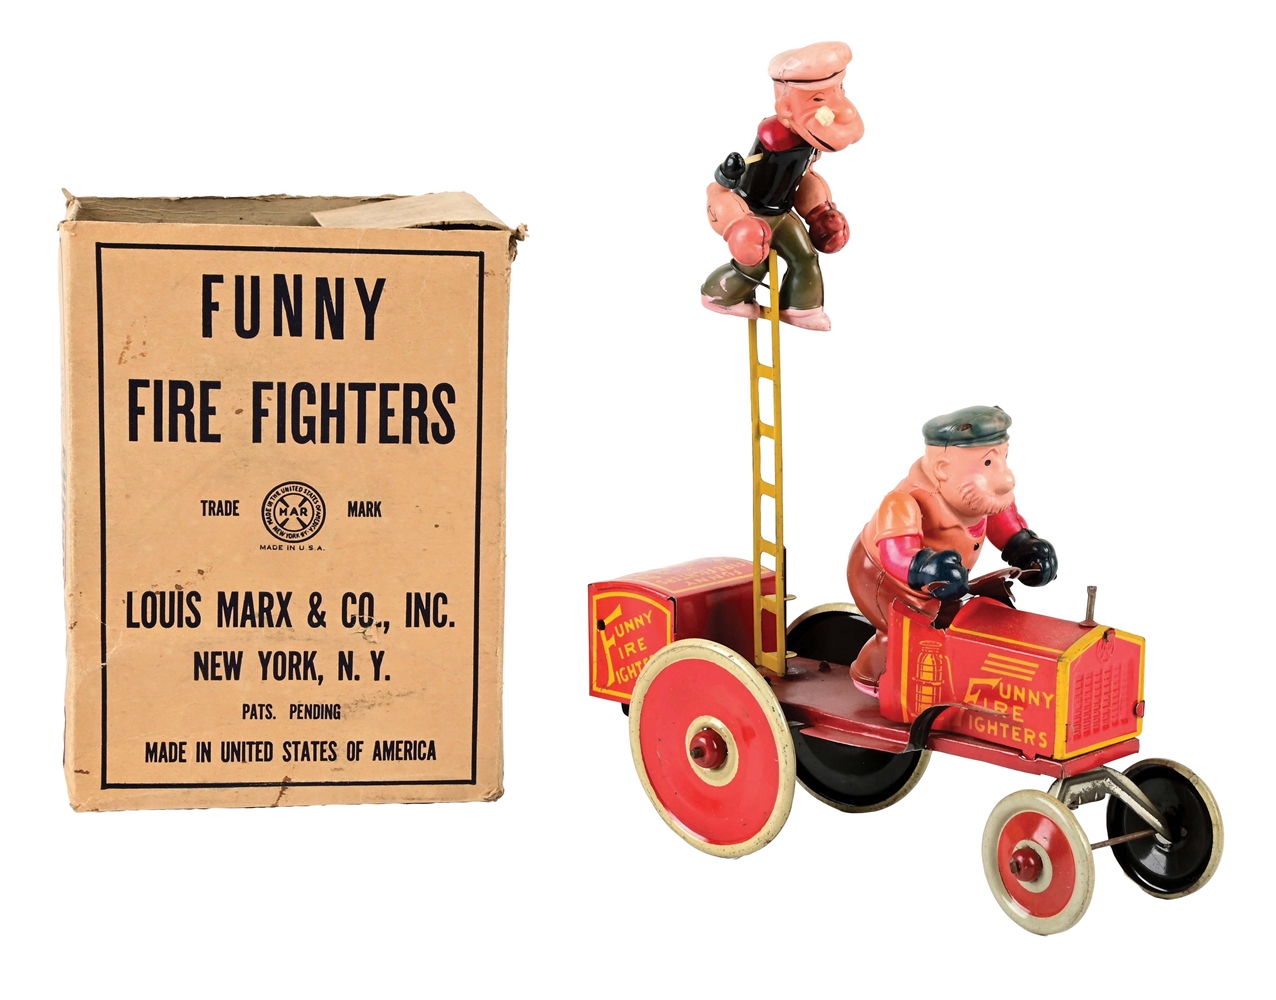 MARX TIN LITHO AND CELLULOID WIND-UP POPEYE FUNNY FIRE FIGHTERS TOY.